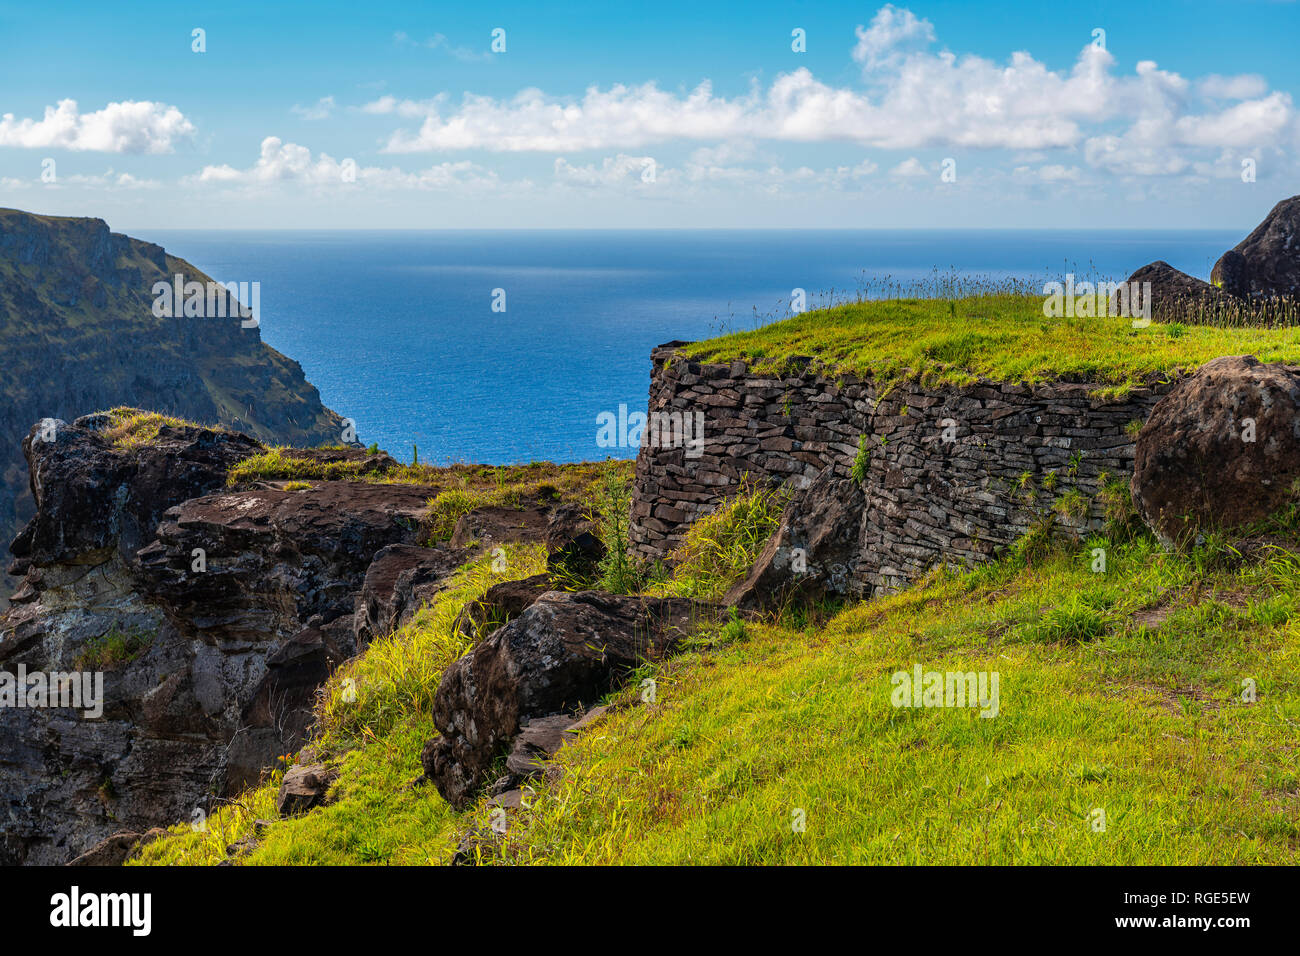 The ceremonial and religious center of Orongo by the Rano Kau volcanic crater and the Pacific Ocean on Rapa Nui (Easter Island), Chile. Stock Photo